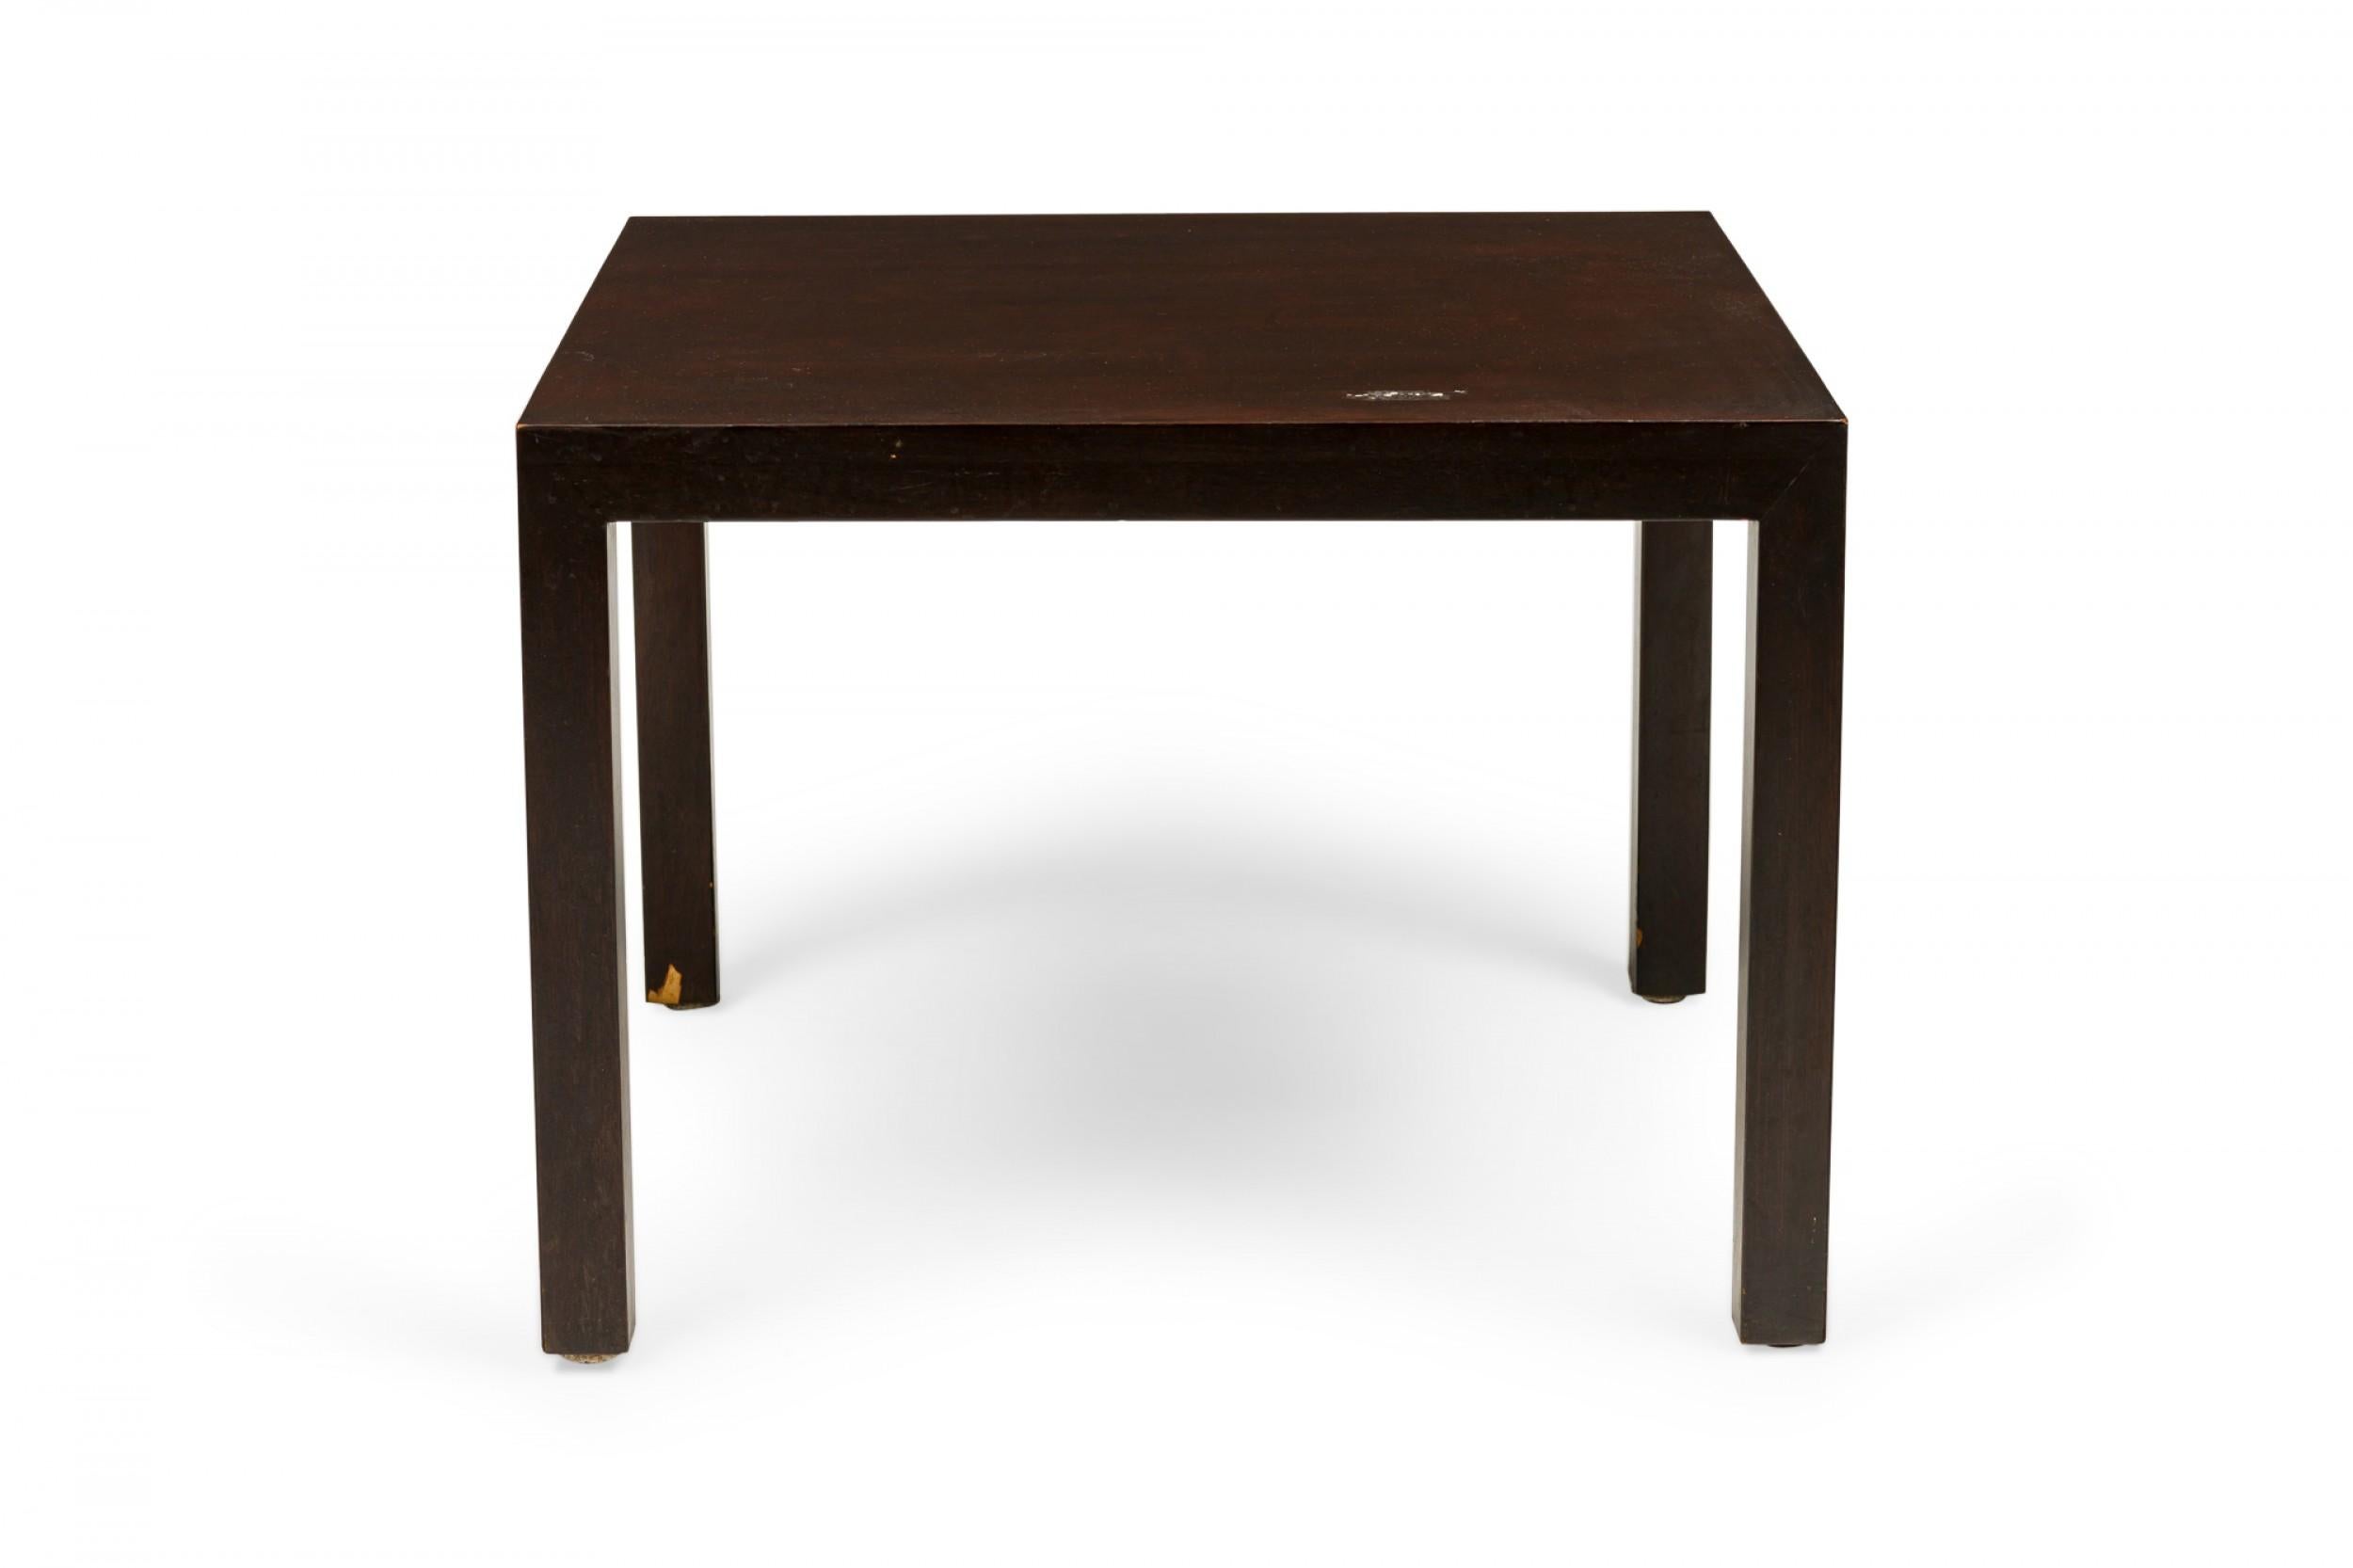 American Mid-Century wooden square end / side table with four square wooden legs with a dark brown stained finish. (PAUL MCCOBB FOR DUNBAR FURNITURE COMPANY)
